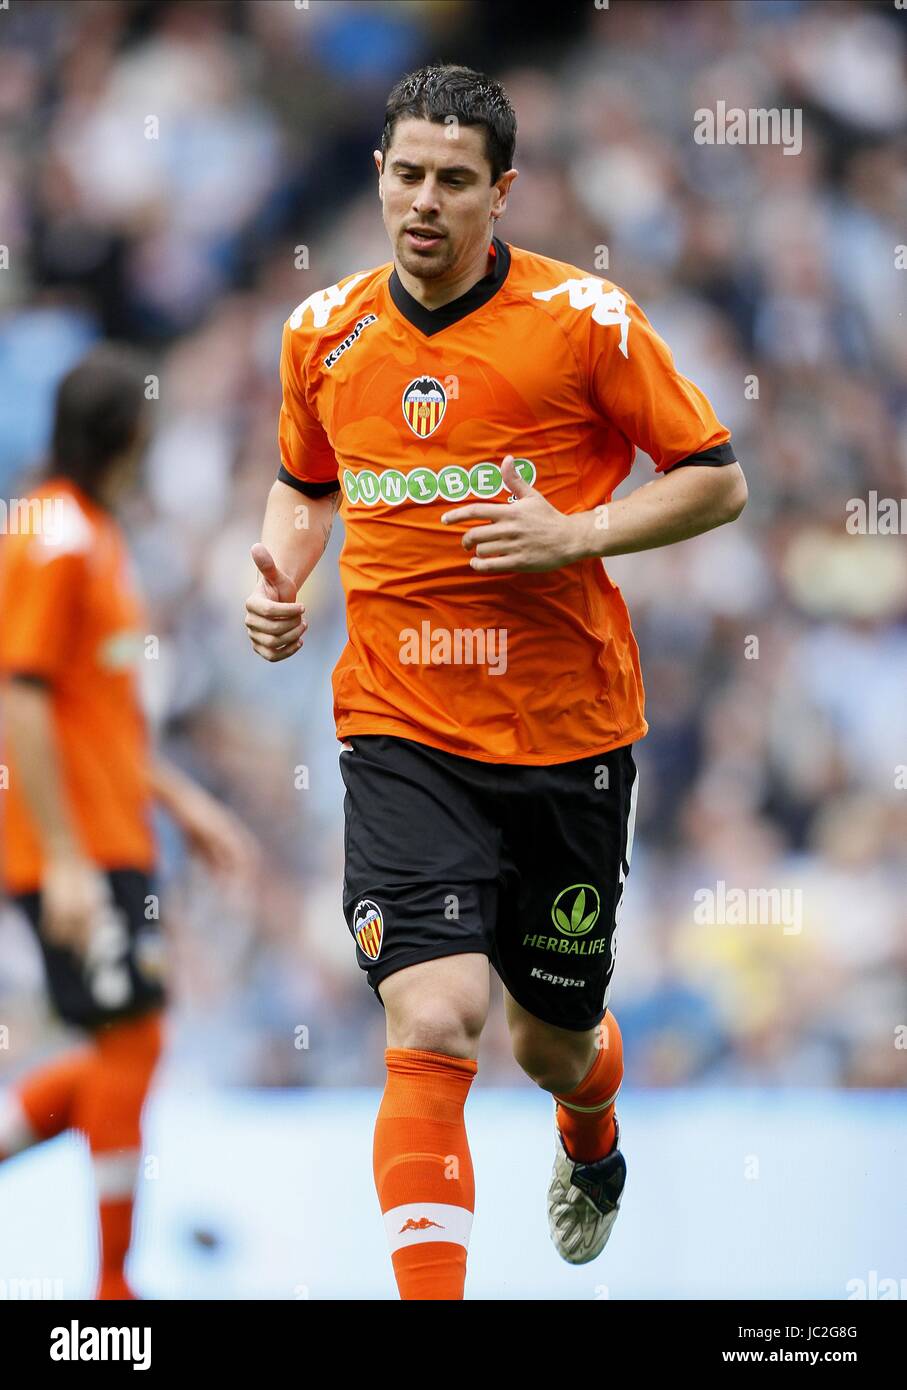 ASIER DEL HORNO VALENCIA CF VALENCIA CF EASTLANDS CITY OF MANCHESTER ST  MANCHESTER ENGLAND 07 August 2010 Stock Photo - Alamy